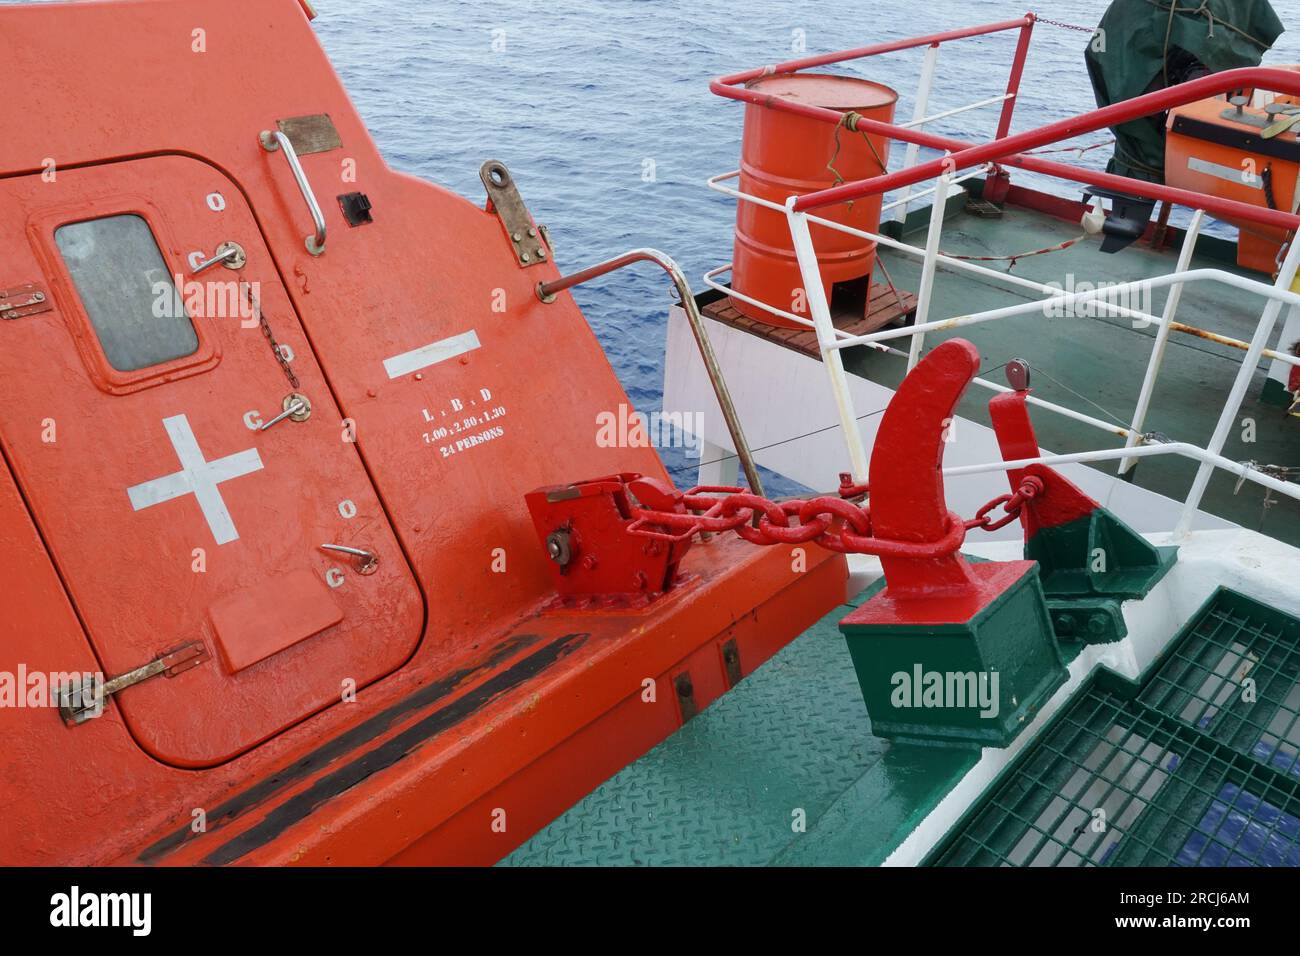 View on release mechanism of orange free fall lifeboat with hook and chain secured on launching ramp. Stock Photo